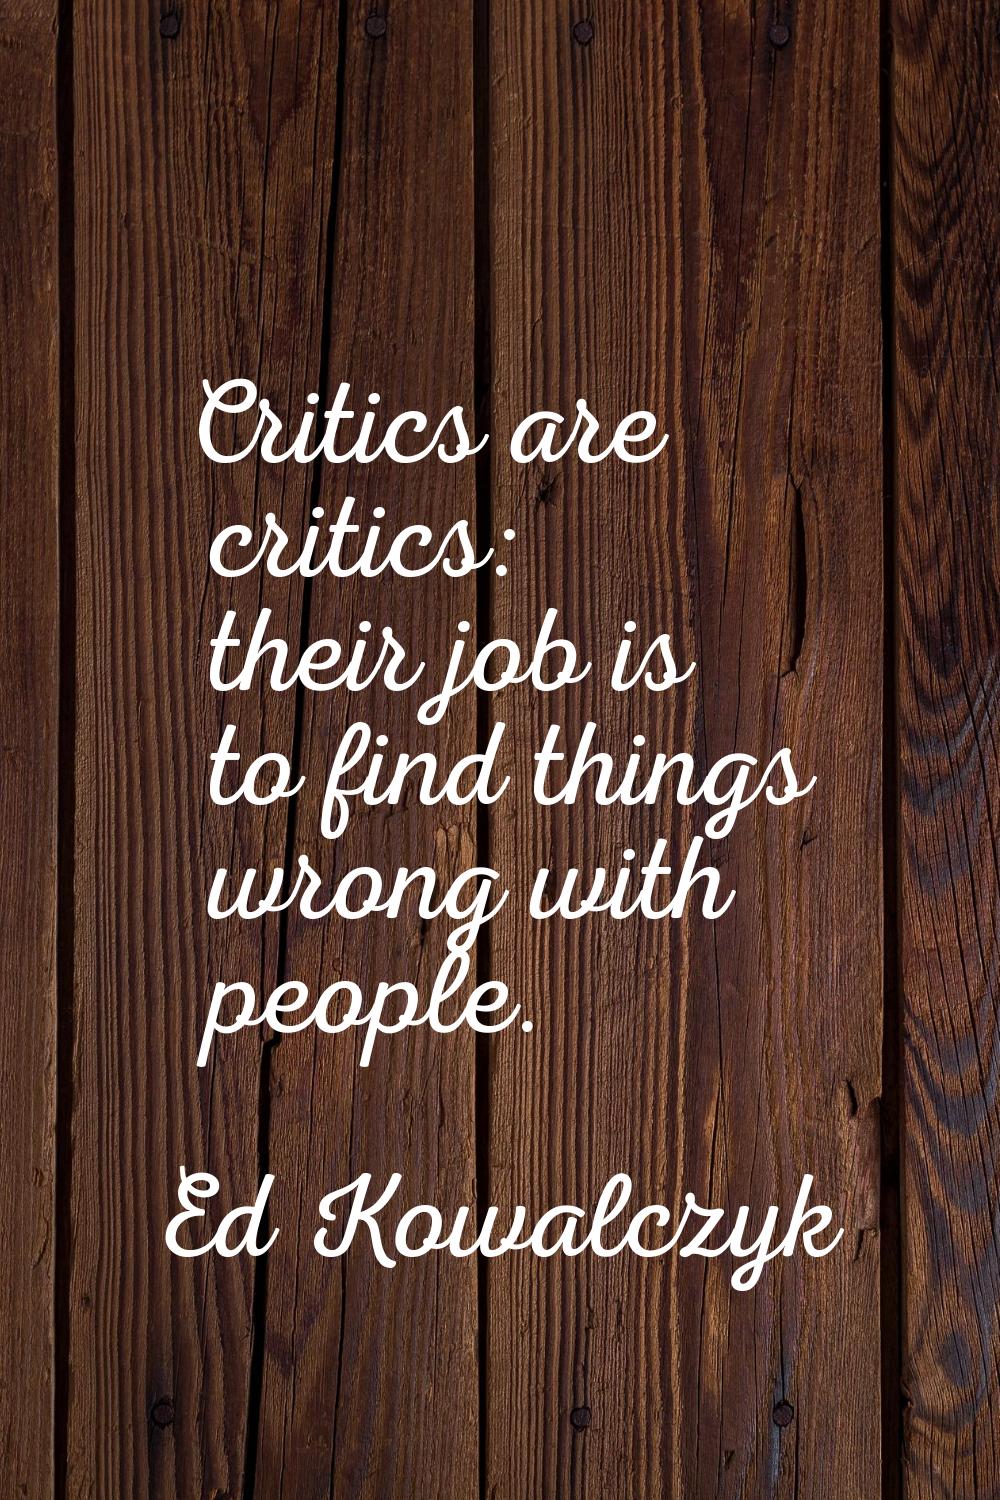 Critics are critics: their job is to find things wrong with people.